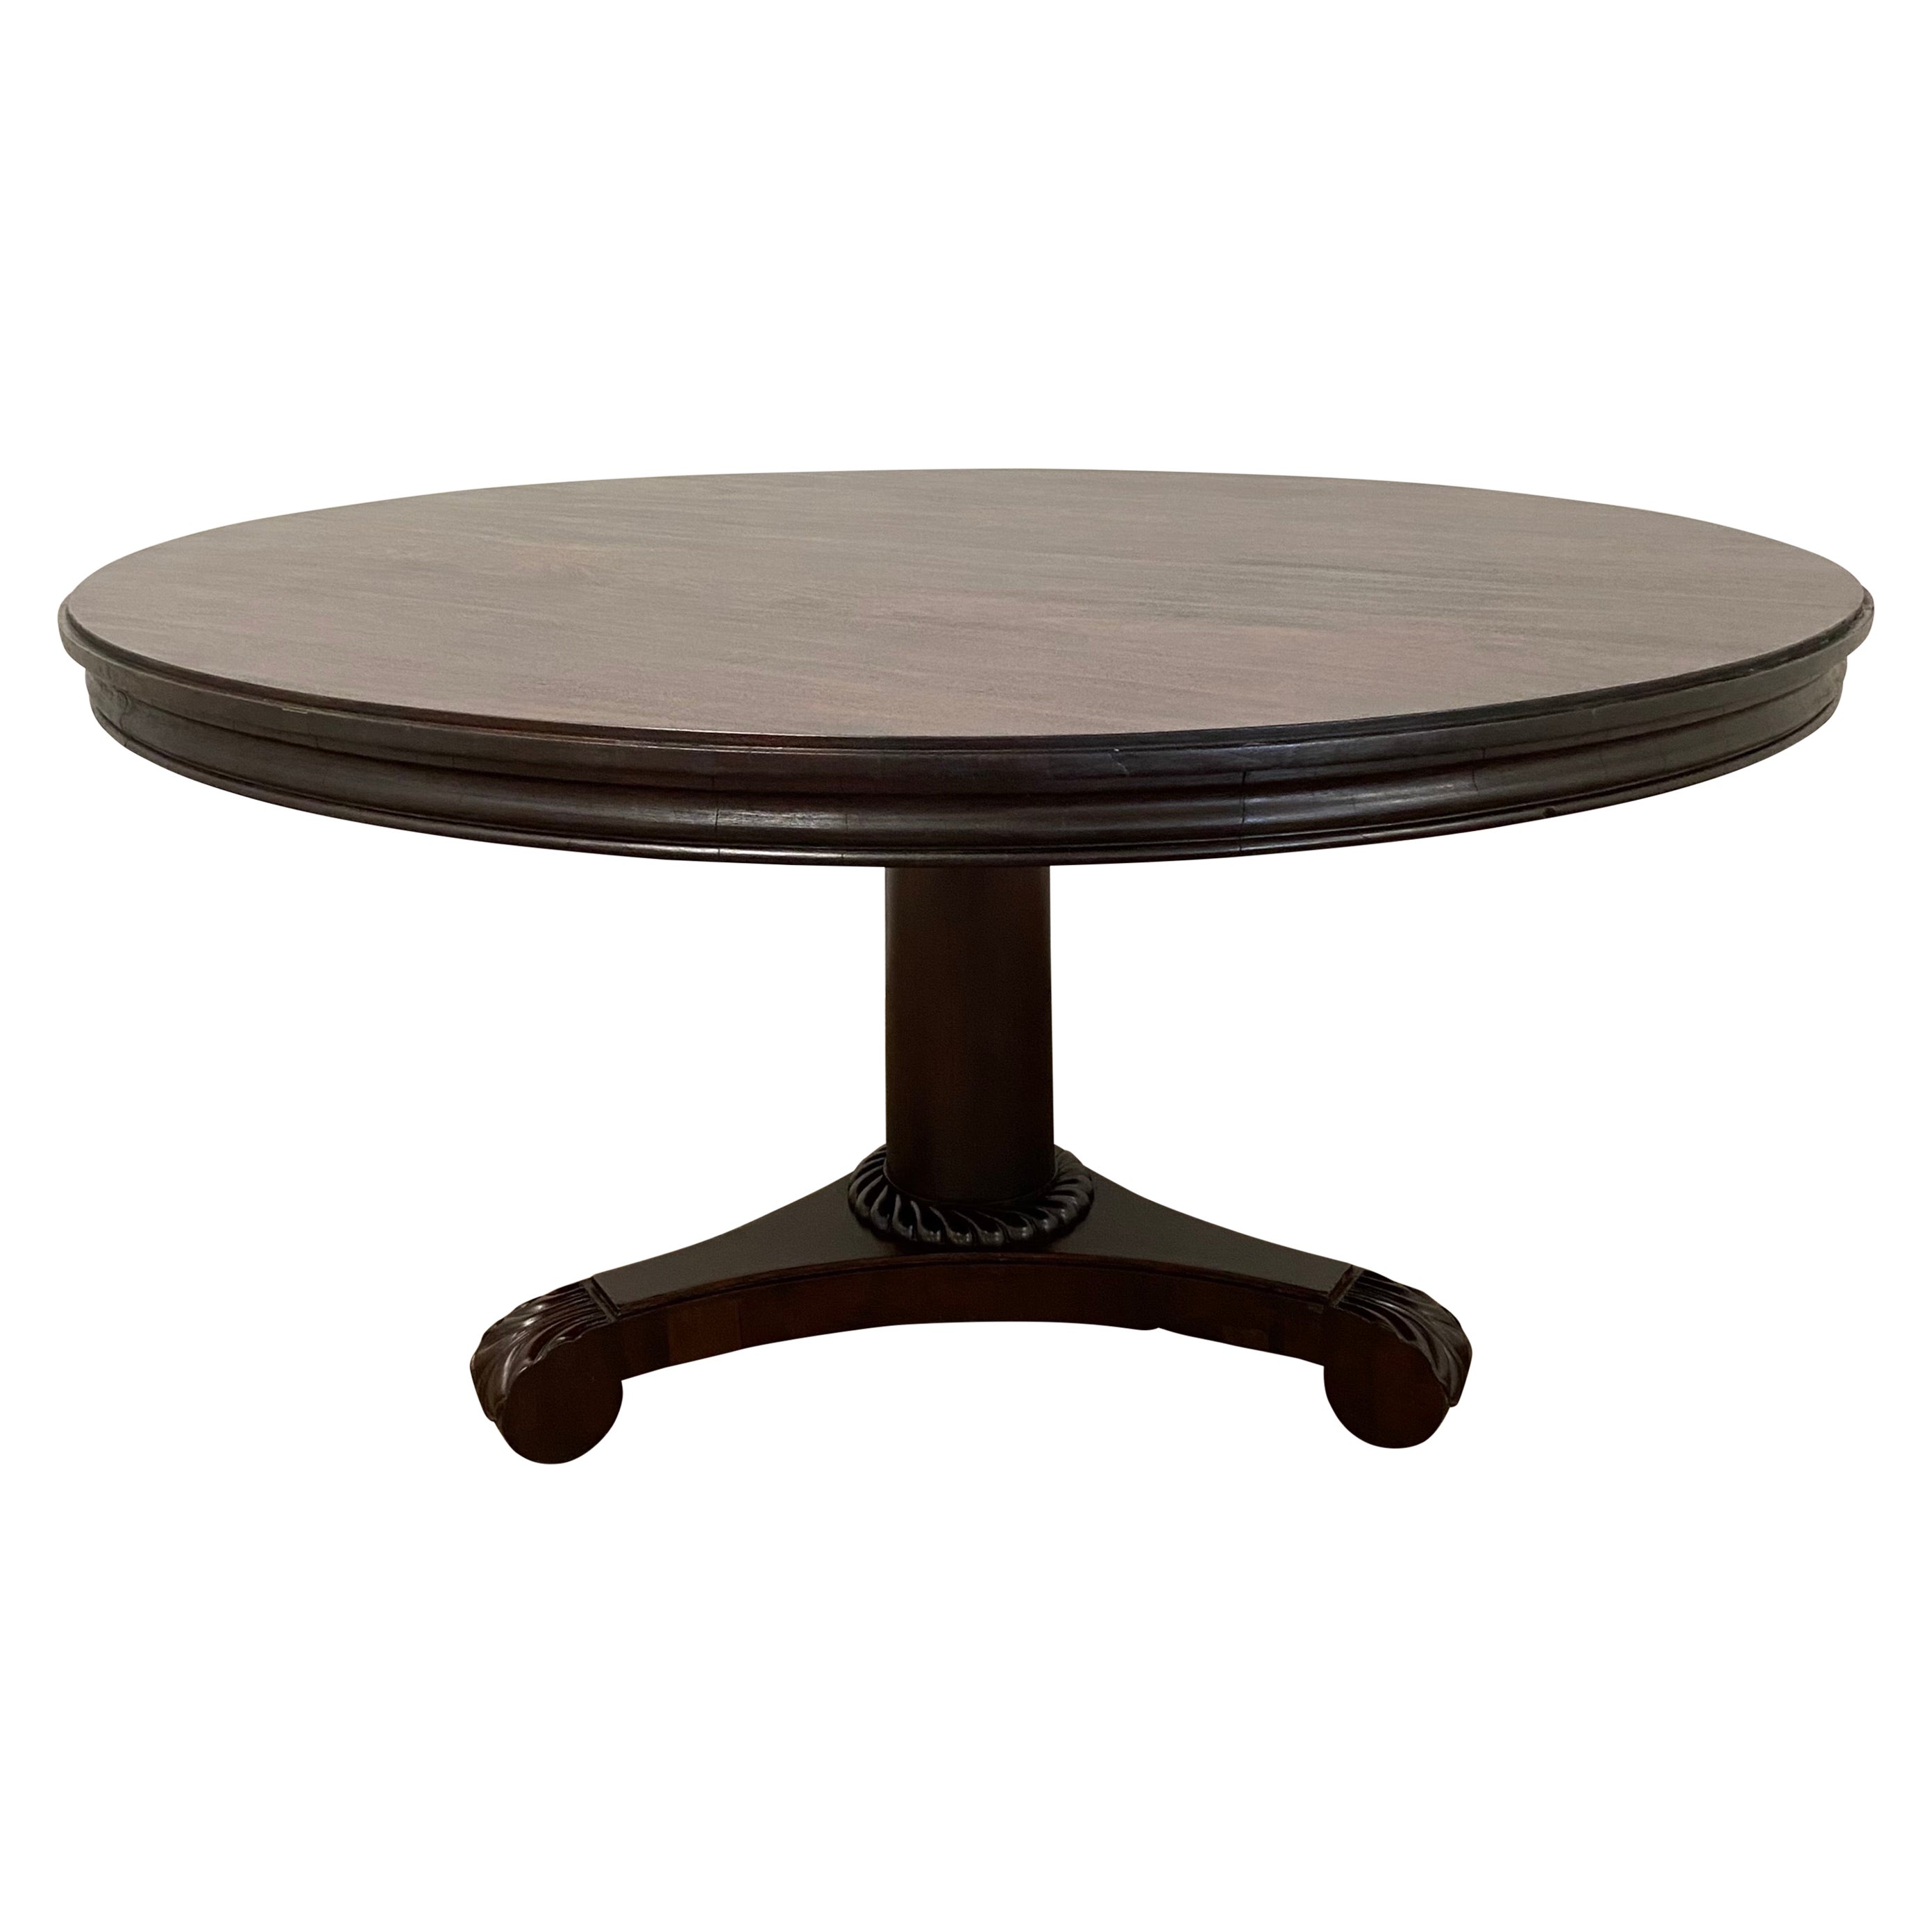 Round English Regency Pedestal Dining or Center Table